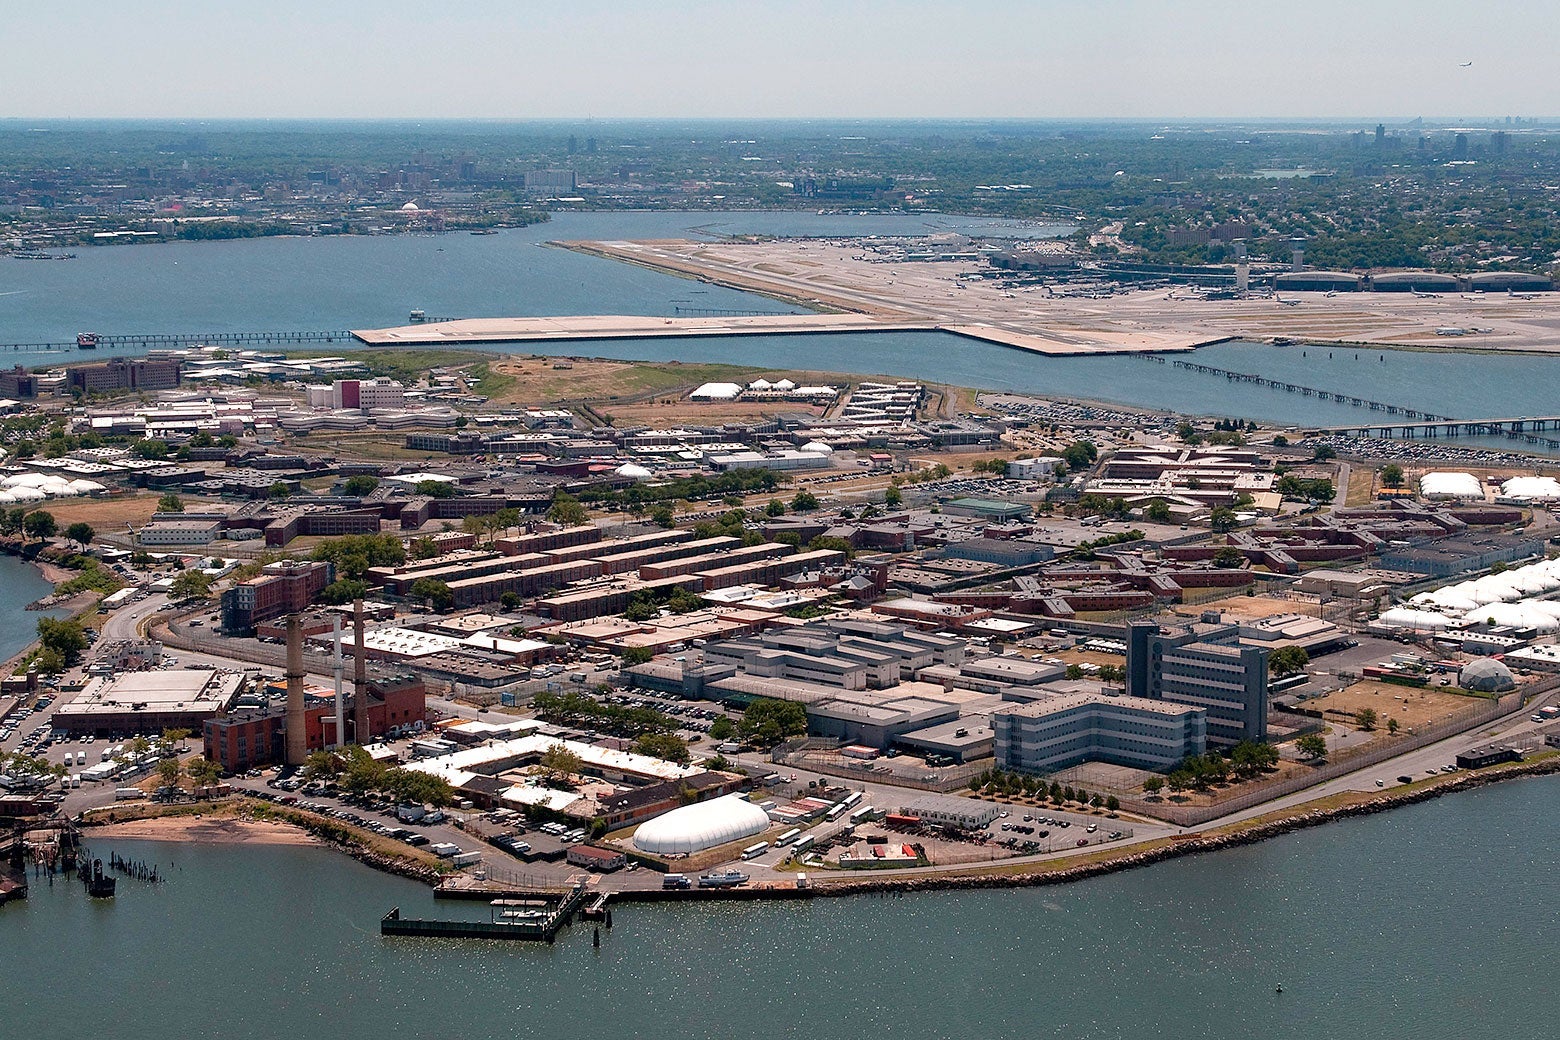 An aerial view of the Rikers Island prison in New York City.